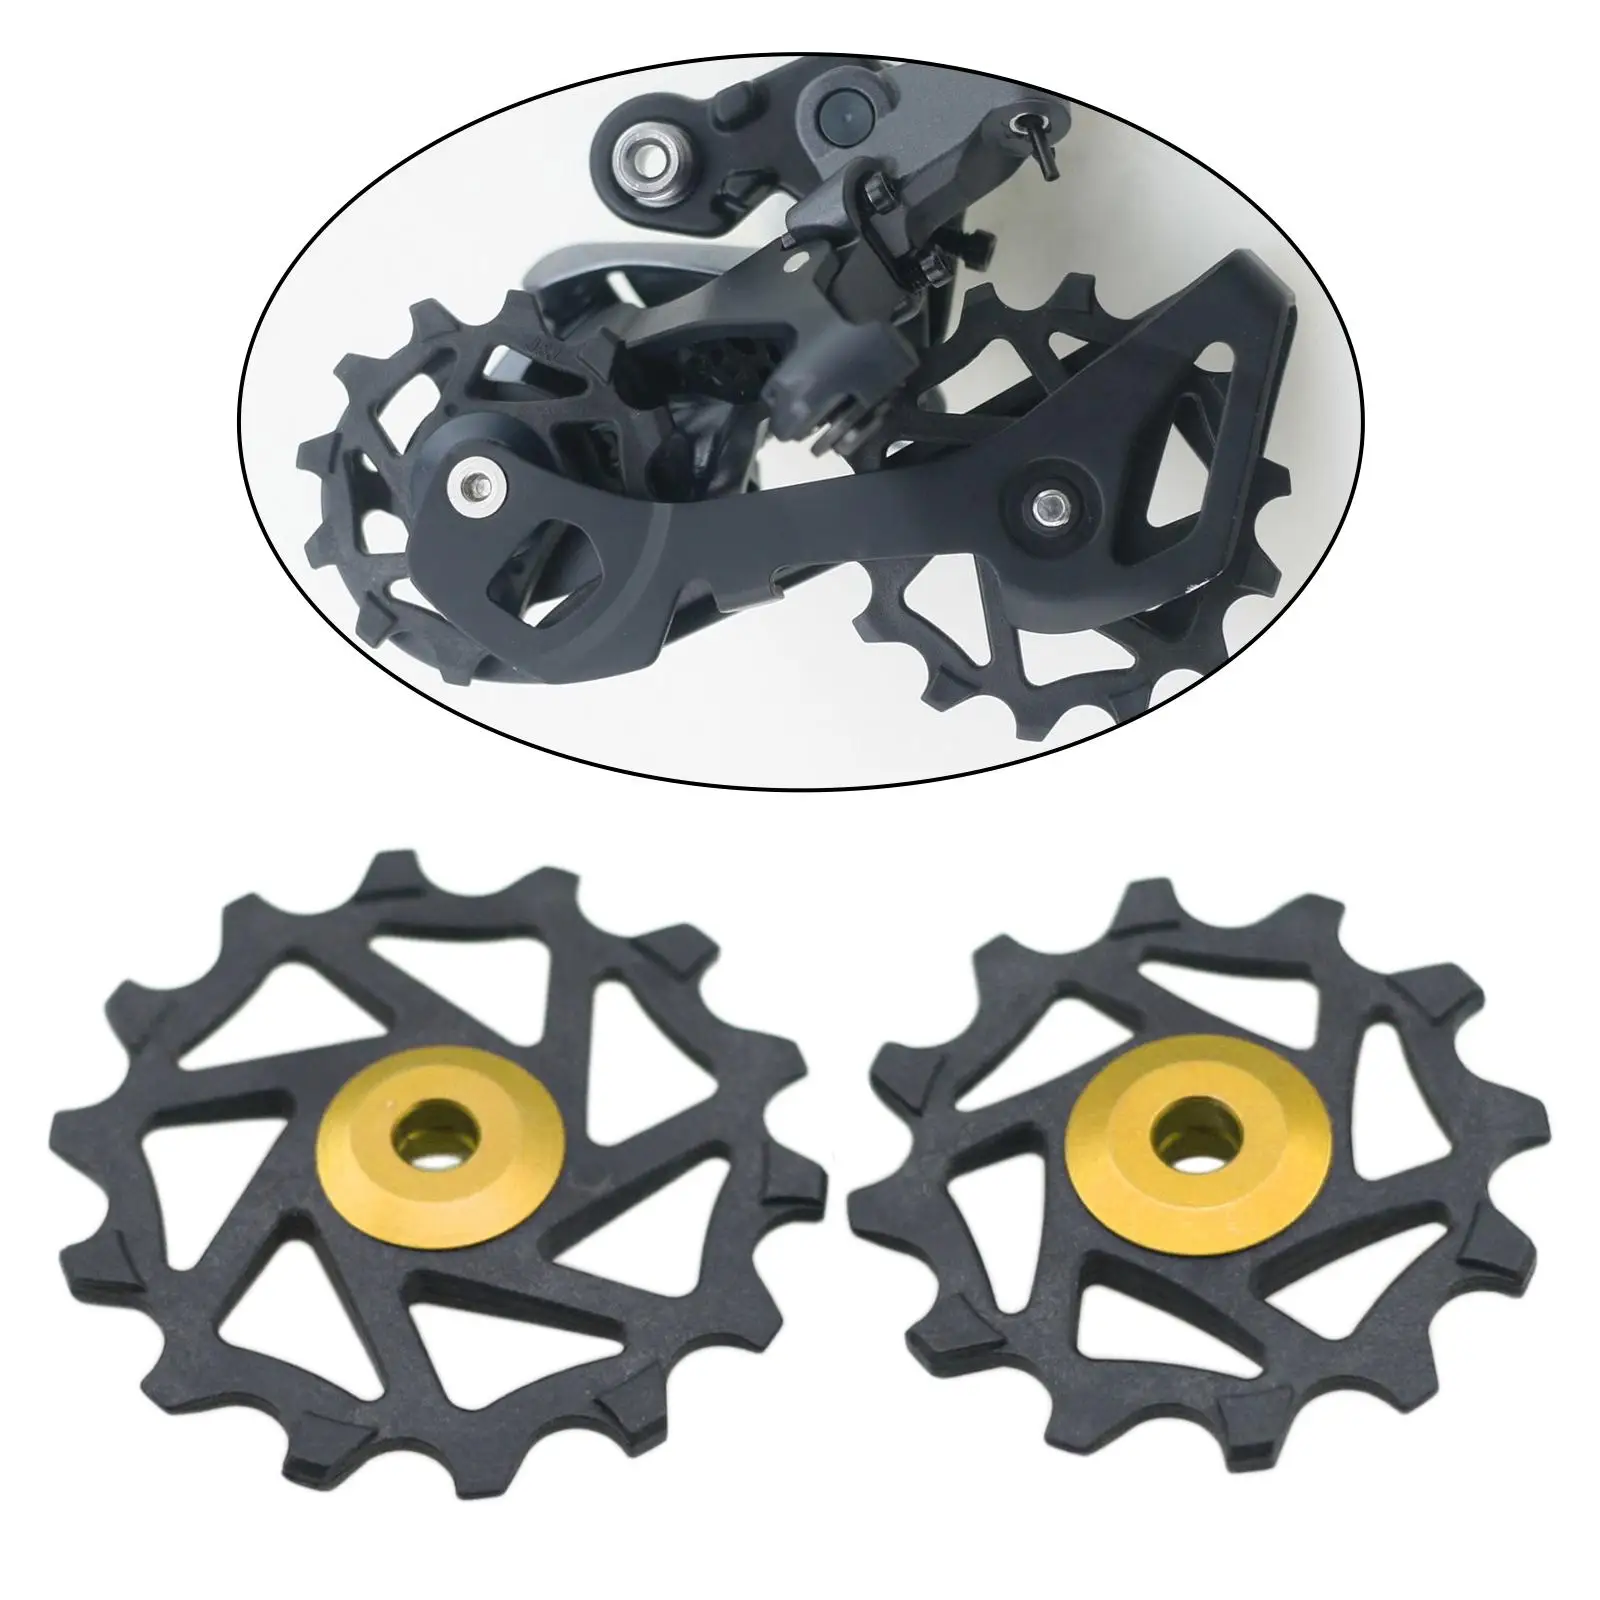 Bike Resin Bearing Jockey Wheel Pulley Bicycle Rear Derailleur Cycling 12T+14T for XX1 X01 Bicycle Cycling Part